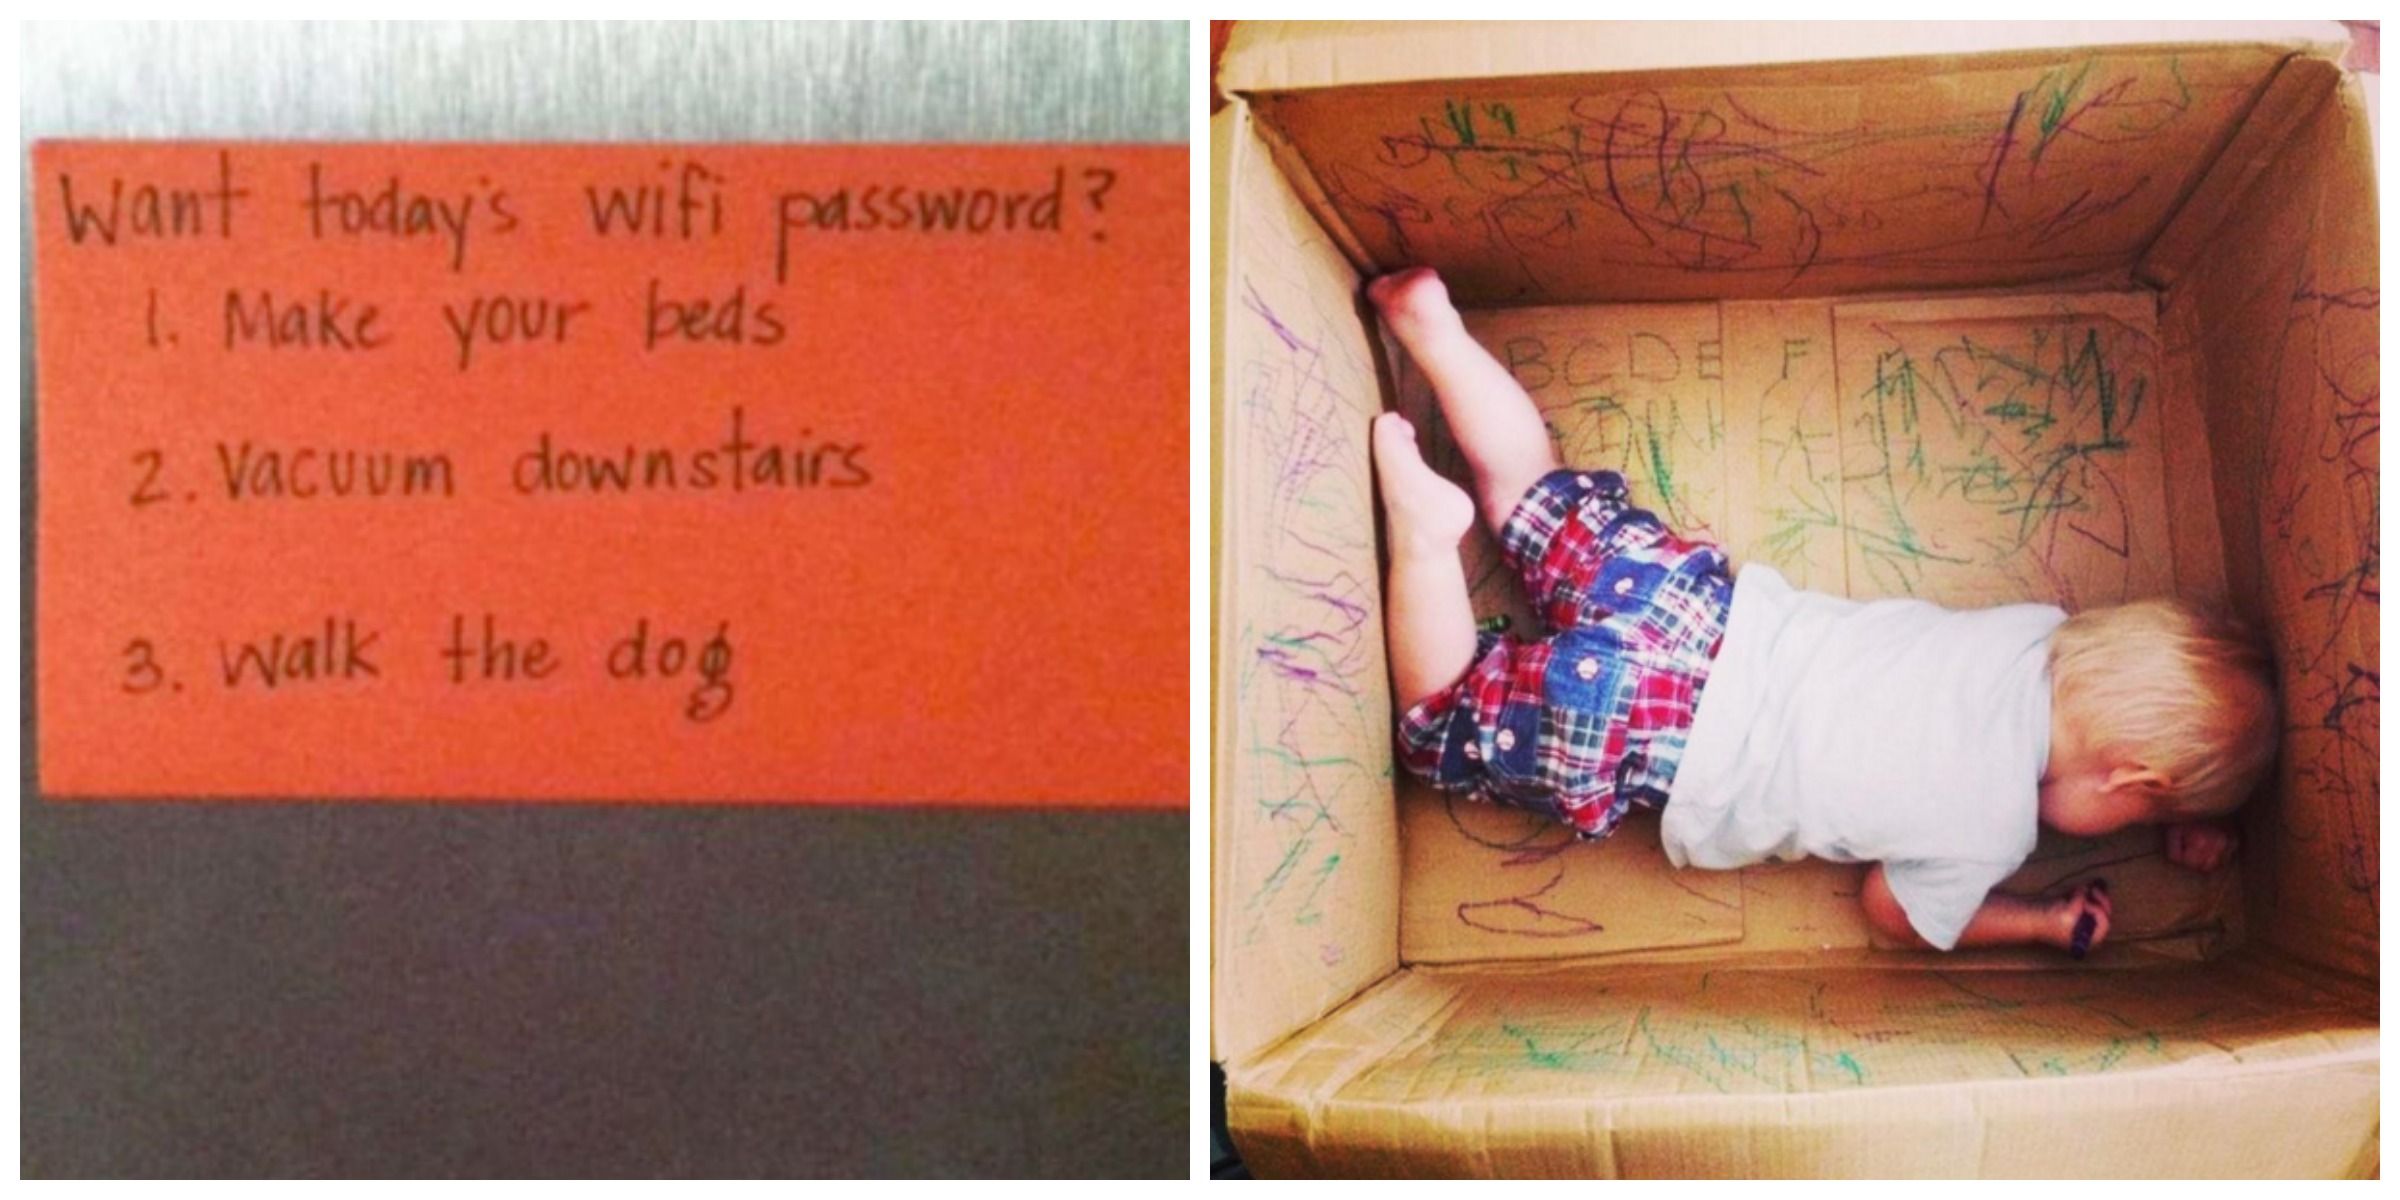 12 Hilarious But Brilliant Parenting Hacks - Funny Tips for Life